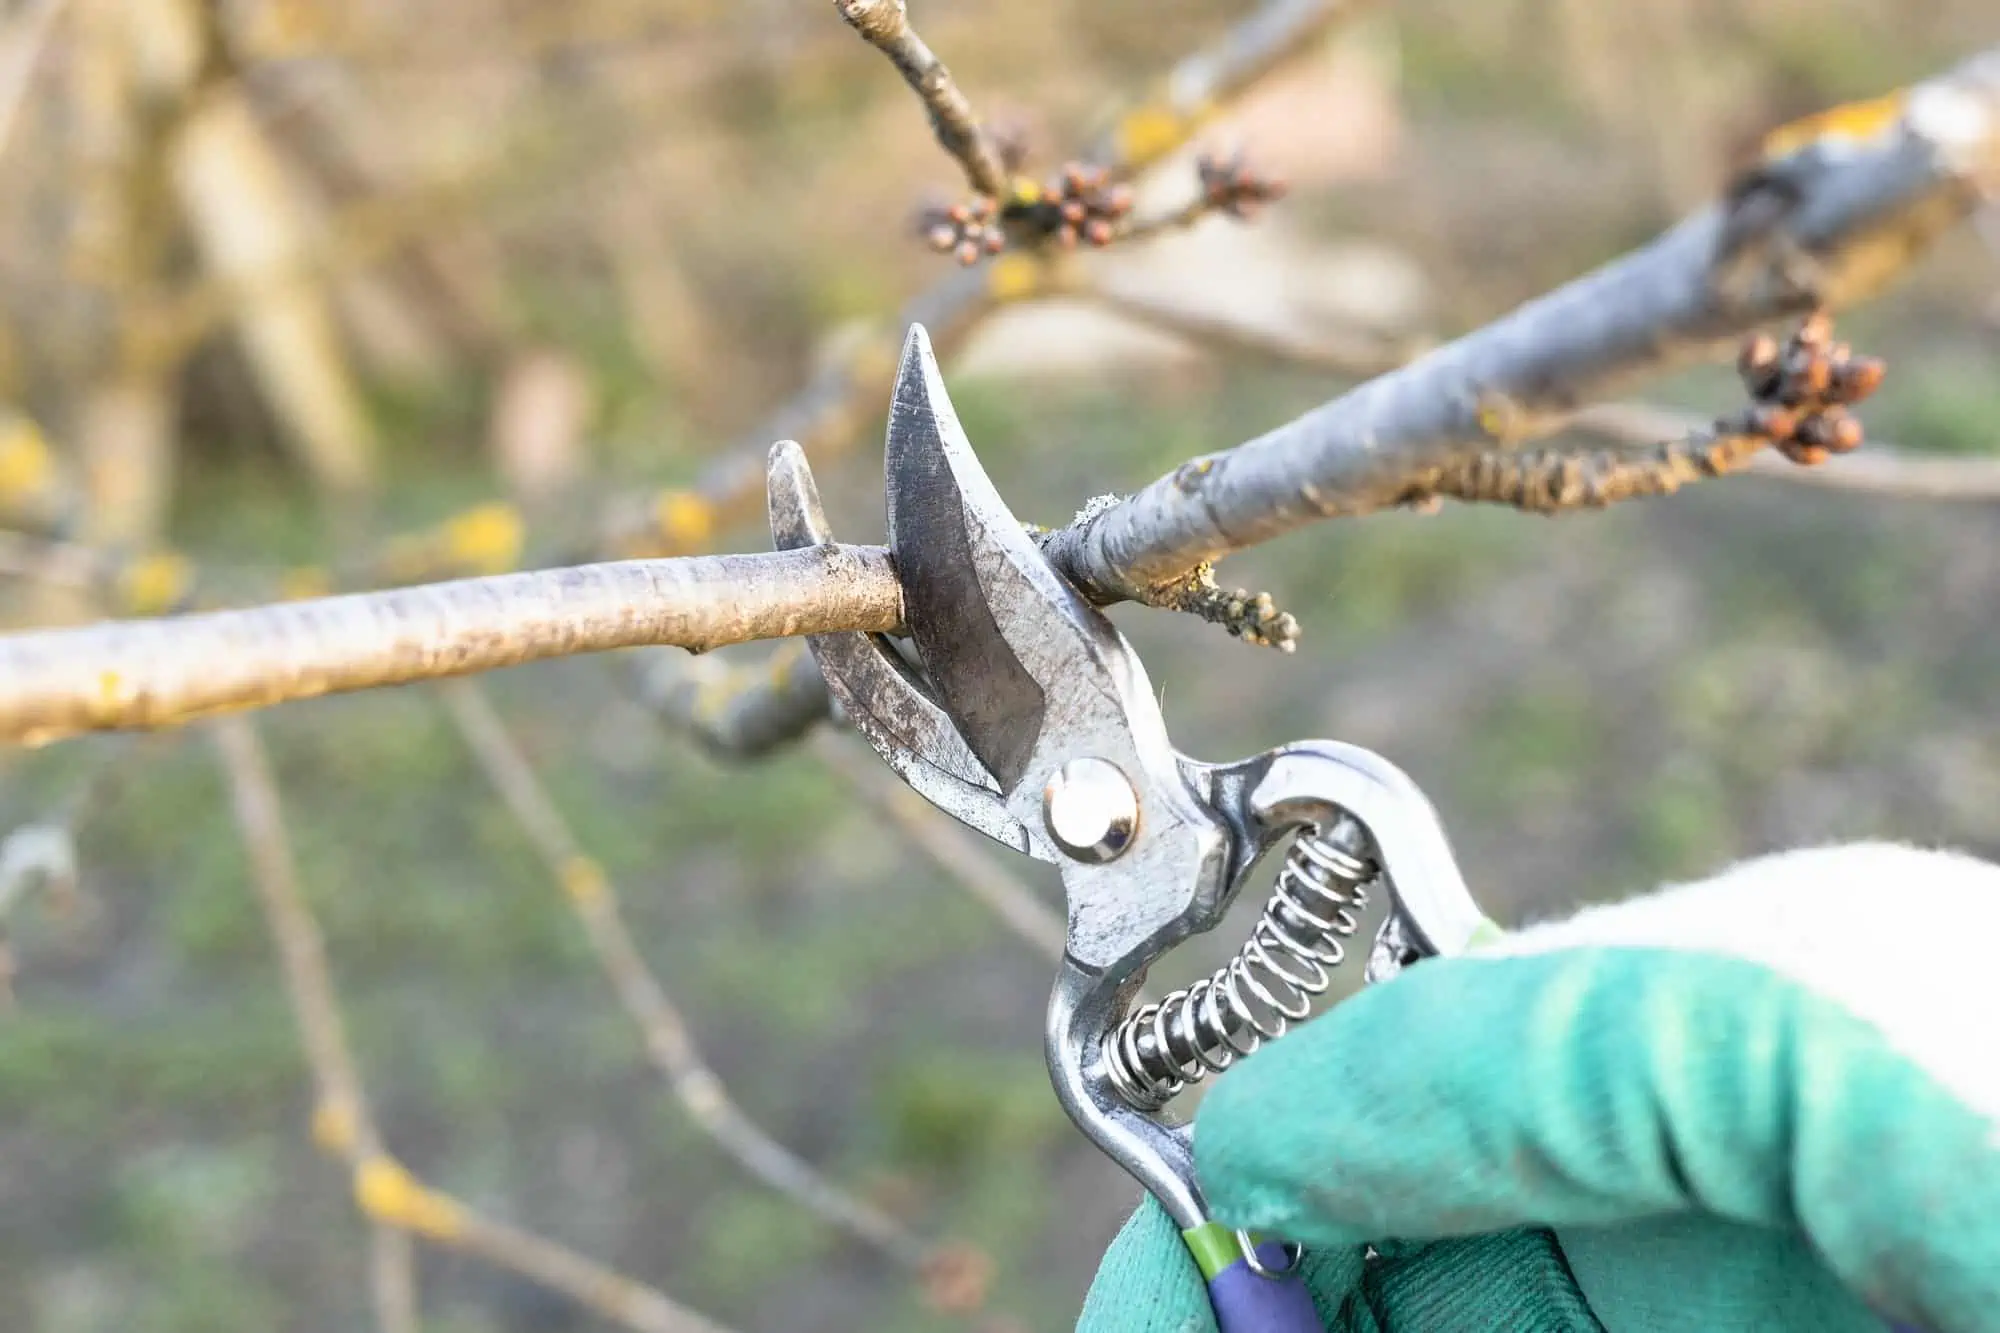 pruning twig of fruit tree with secateurs close up